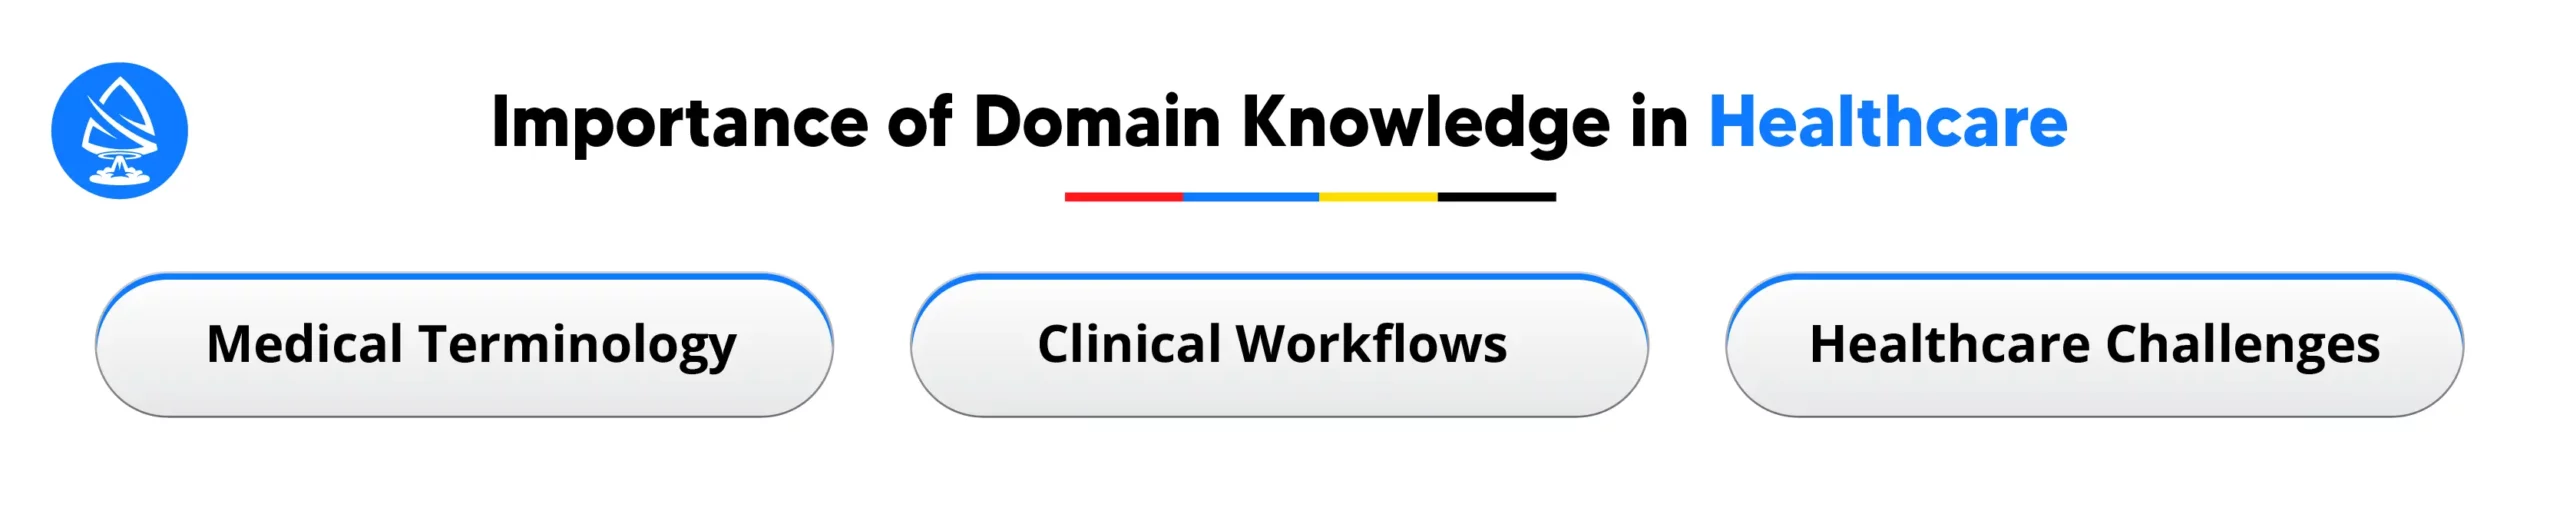 Importance of Domain Knowledge in Healthcare